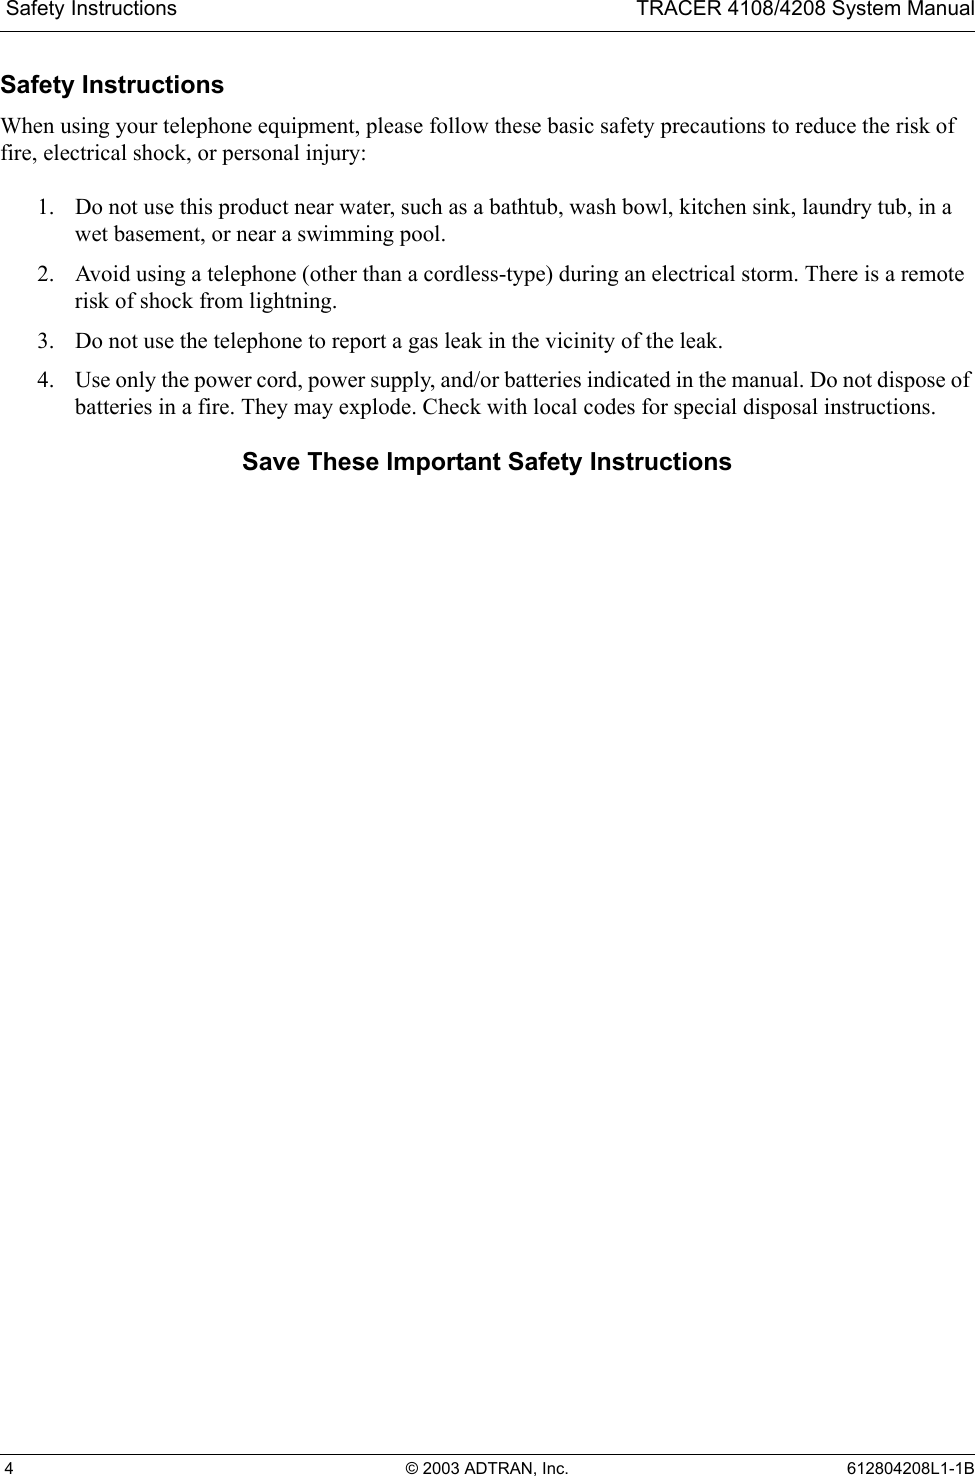  Safety Instructions TRACER 4108/4208 System Manual 4 © 2003 ADTRAN, Inc. 612804208L1-1BSafety InstructionsWhen using your telephone equipment, please follow these basic safety precautions to reduce the risk of fire, electrical shock, or personal injury:1. Do not use this product near water, such as a bathtub, wash bowl, kitchen sink, laundry tub, in a wet basement, or near a swimming pool.2. Avoid using a telephone (other than a cordless-type) during an electrical storm. There is a remote risk of shock from lightning.3. Do not use the telephone to report a gas leak in the vicinity of the leak.4. Use only the power cord, power supply, and/or batteries indicated in the manual. Do not dispose of batteries in a fire. They may explode. Check with local codes for special disposal instructions.Save These Important Safety Instructions